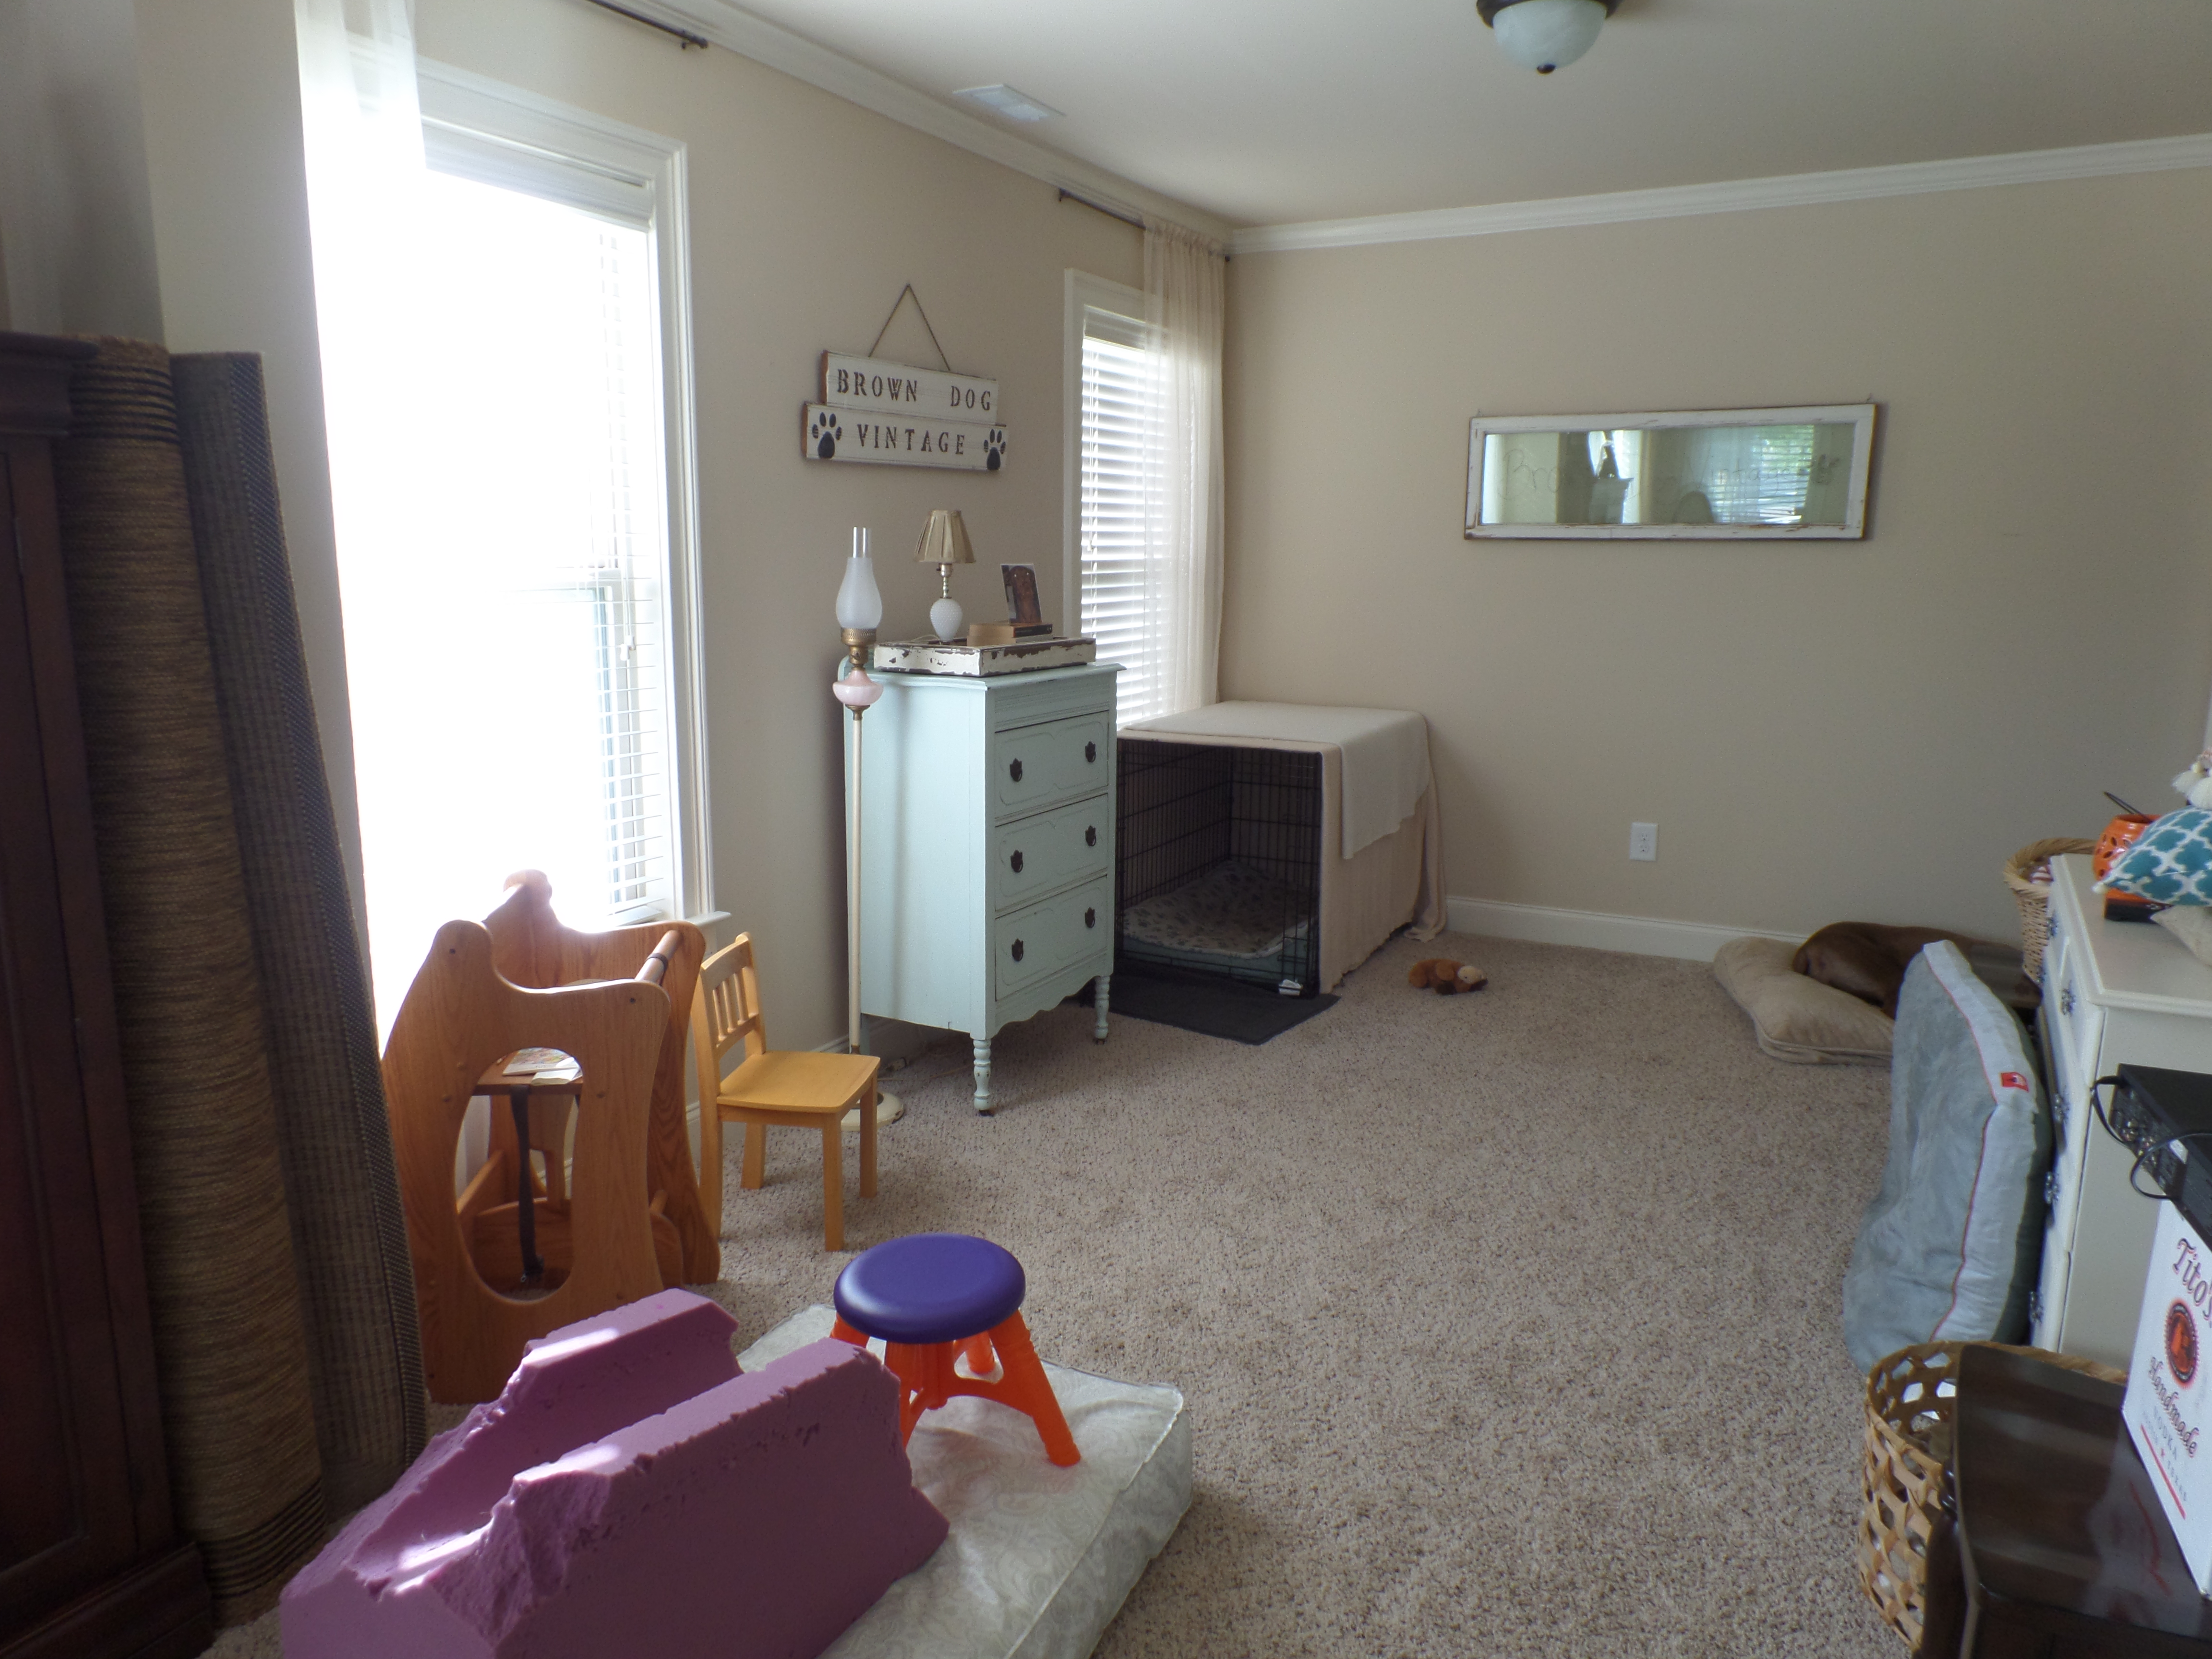 A cluttered master bedroom before a makeover.